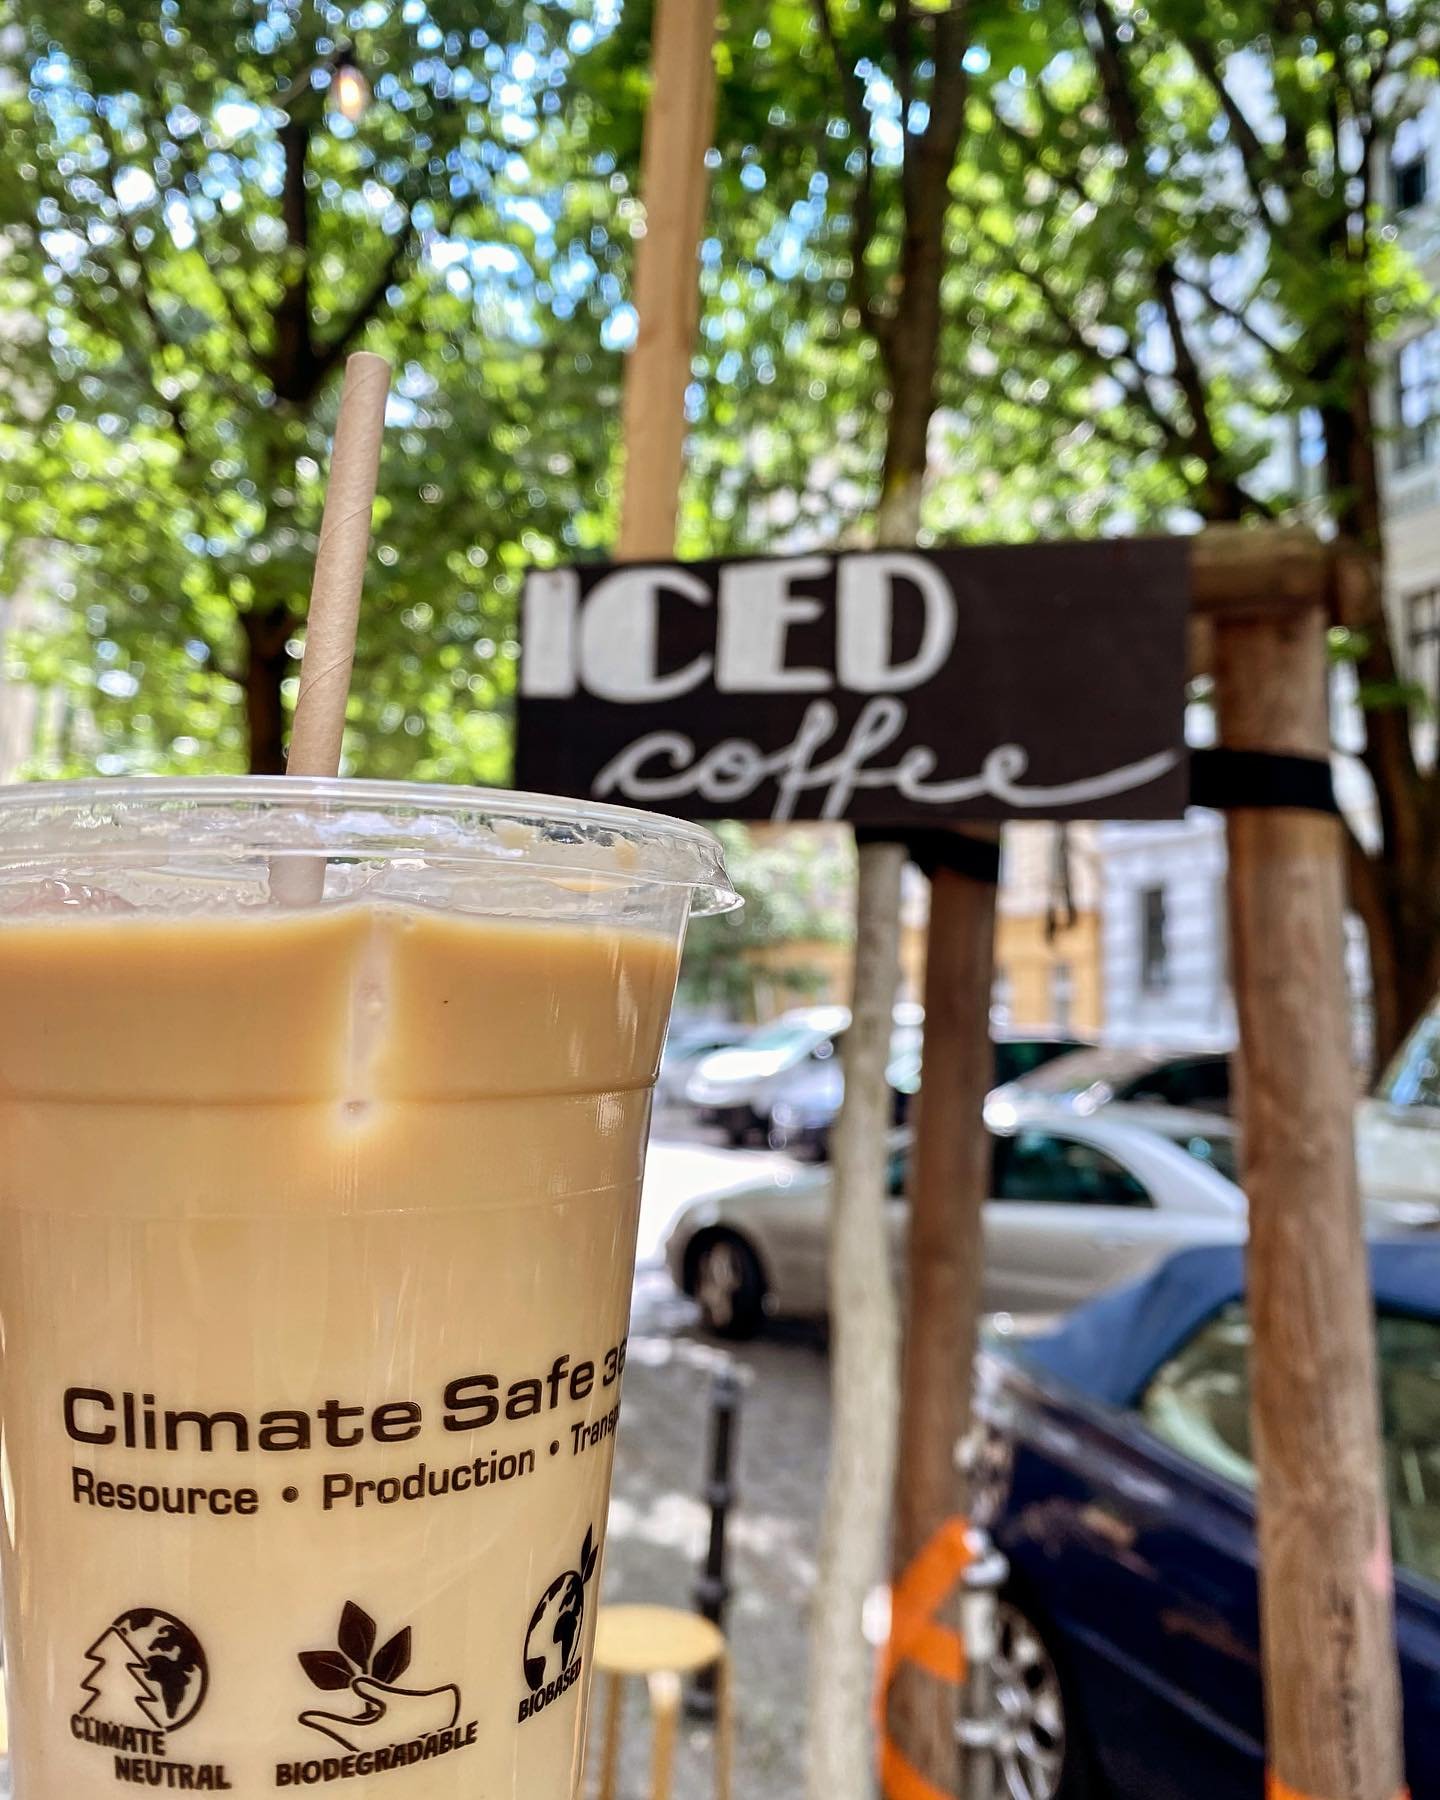 Let me tell you something about this beauty.
This double espresso with milk on ice in a 0.4ml cup is the only thing you need right now. 
#icedlatte #icedcoffee #coffee #vegan #veganfood #coffeeshopberlin #coffeeberlin #coffeetime #coffeelover #coffee